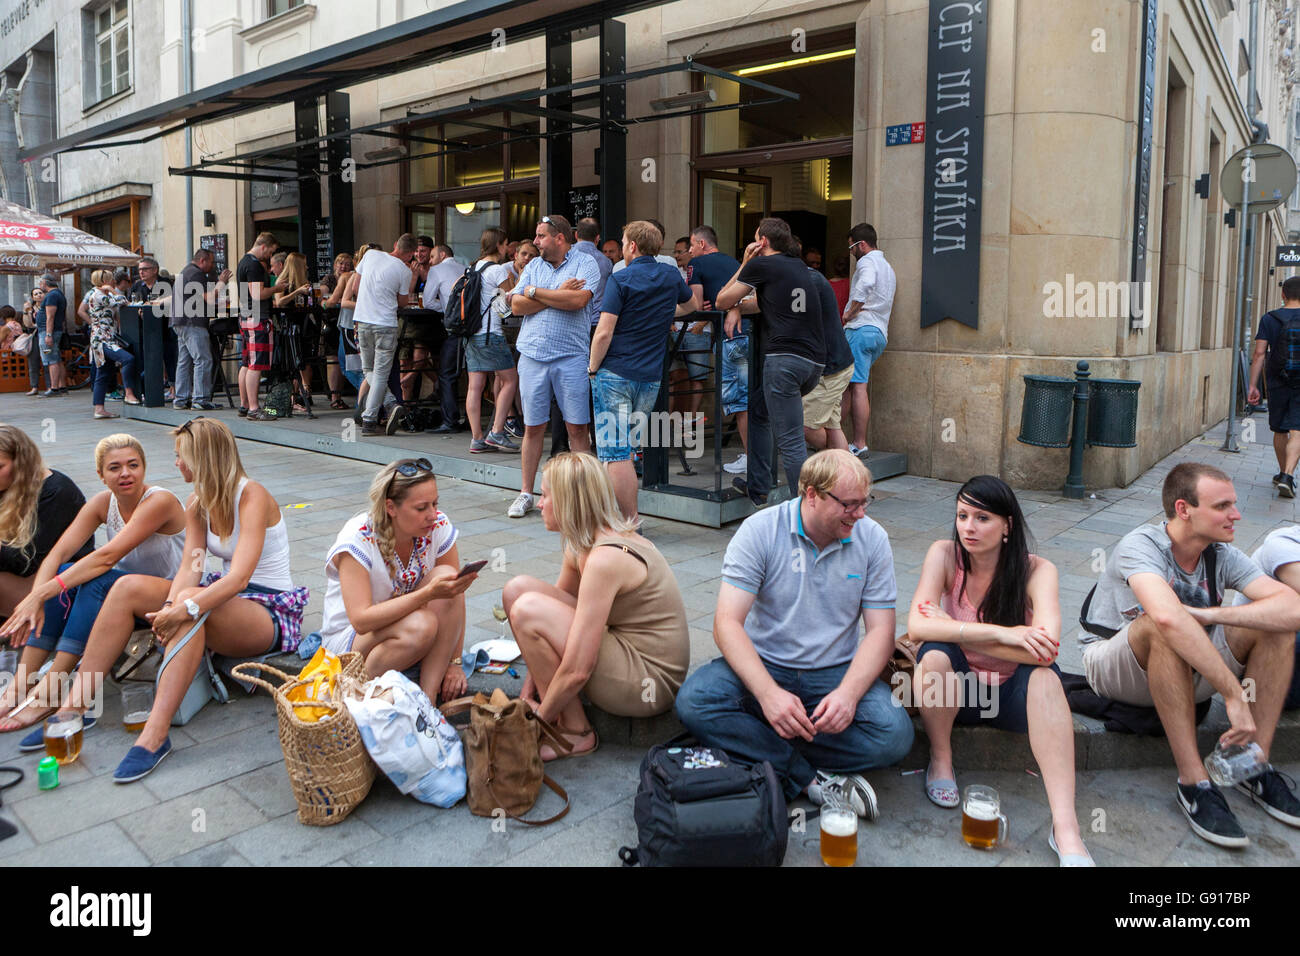 Crowd of people, tourists outside the bar 'Vycep Na stojaka', Jakub square, Brno Old Town Stock Photo